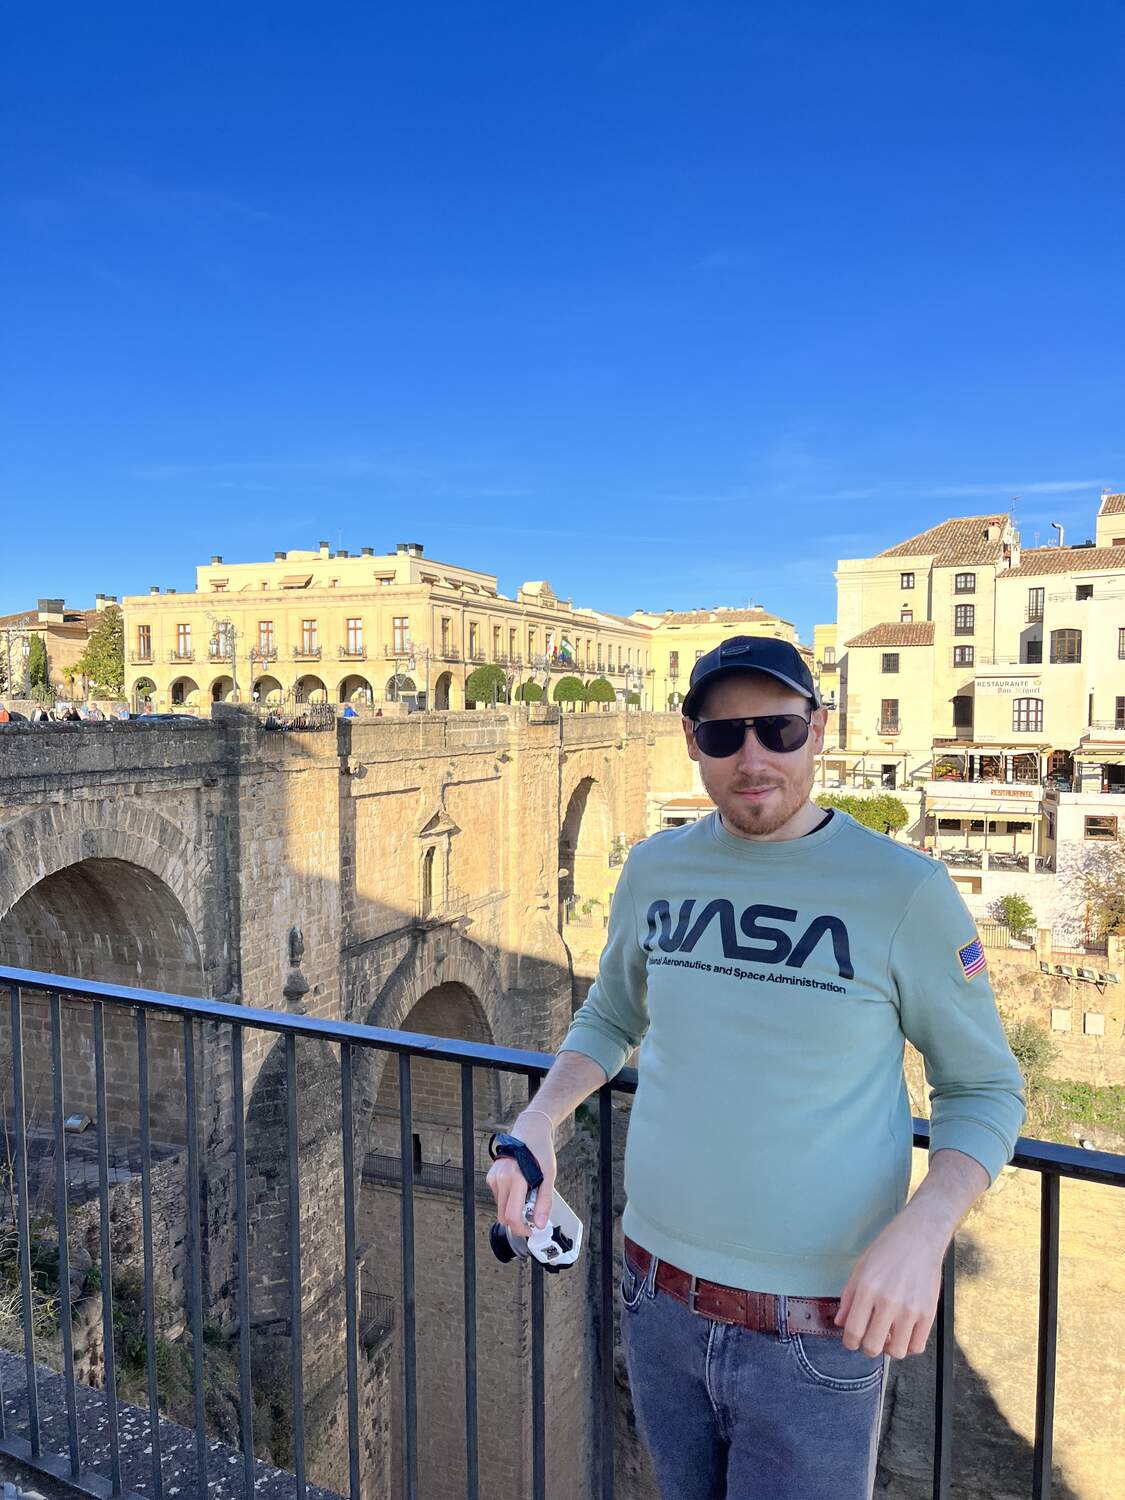 Man posing at a viewpoint in Ronda Spain with the new bridge at the back